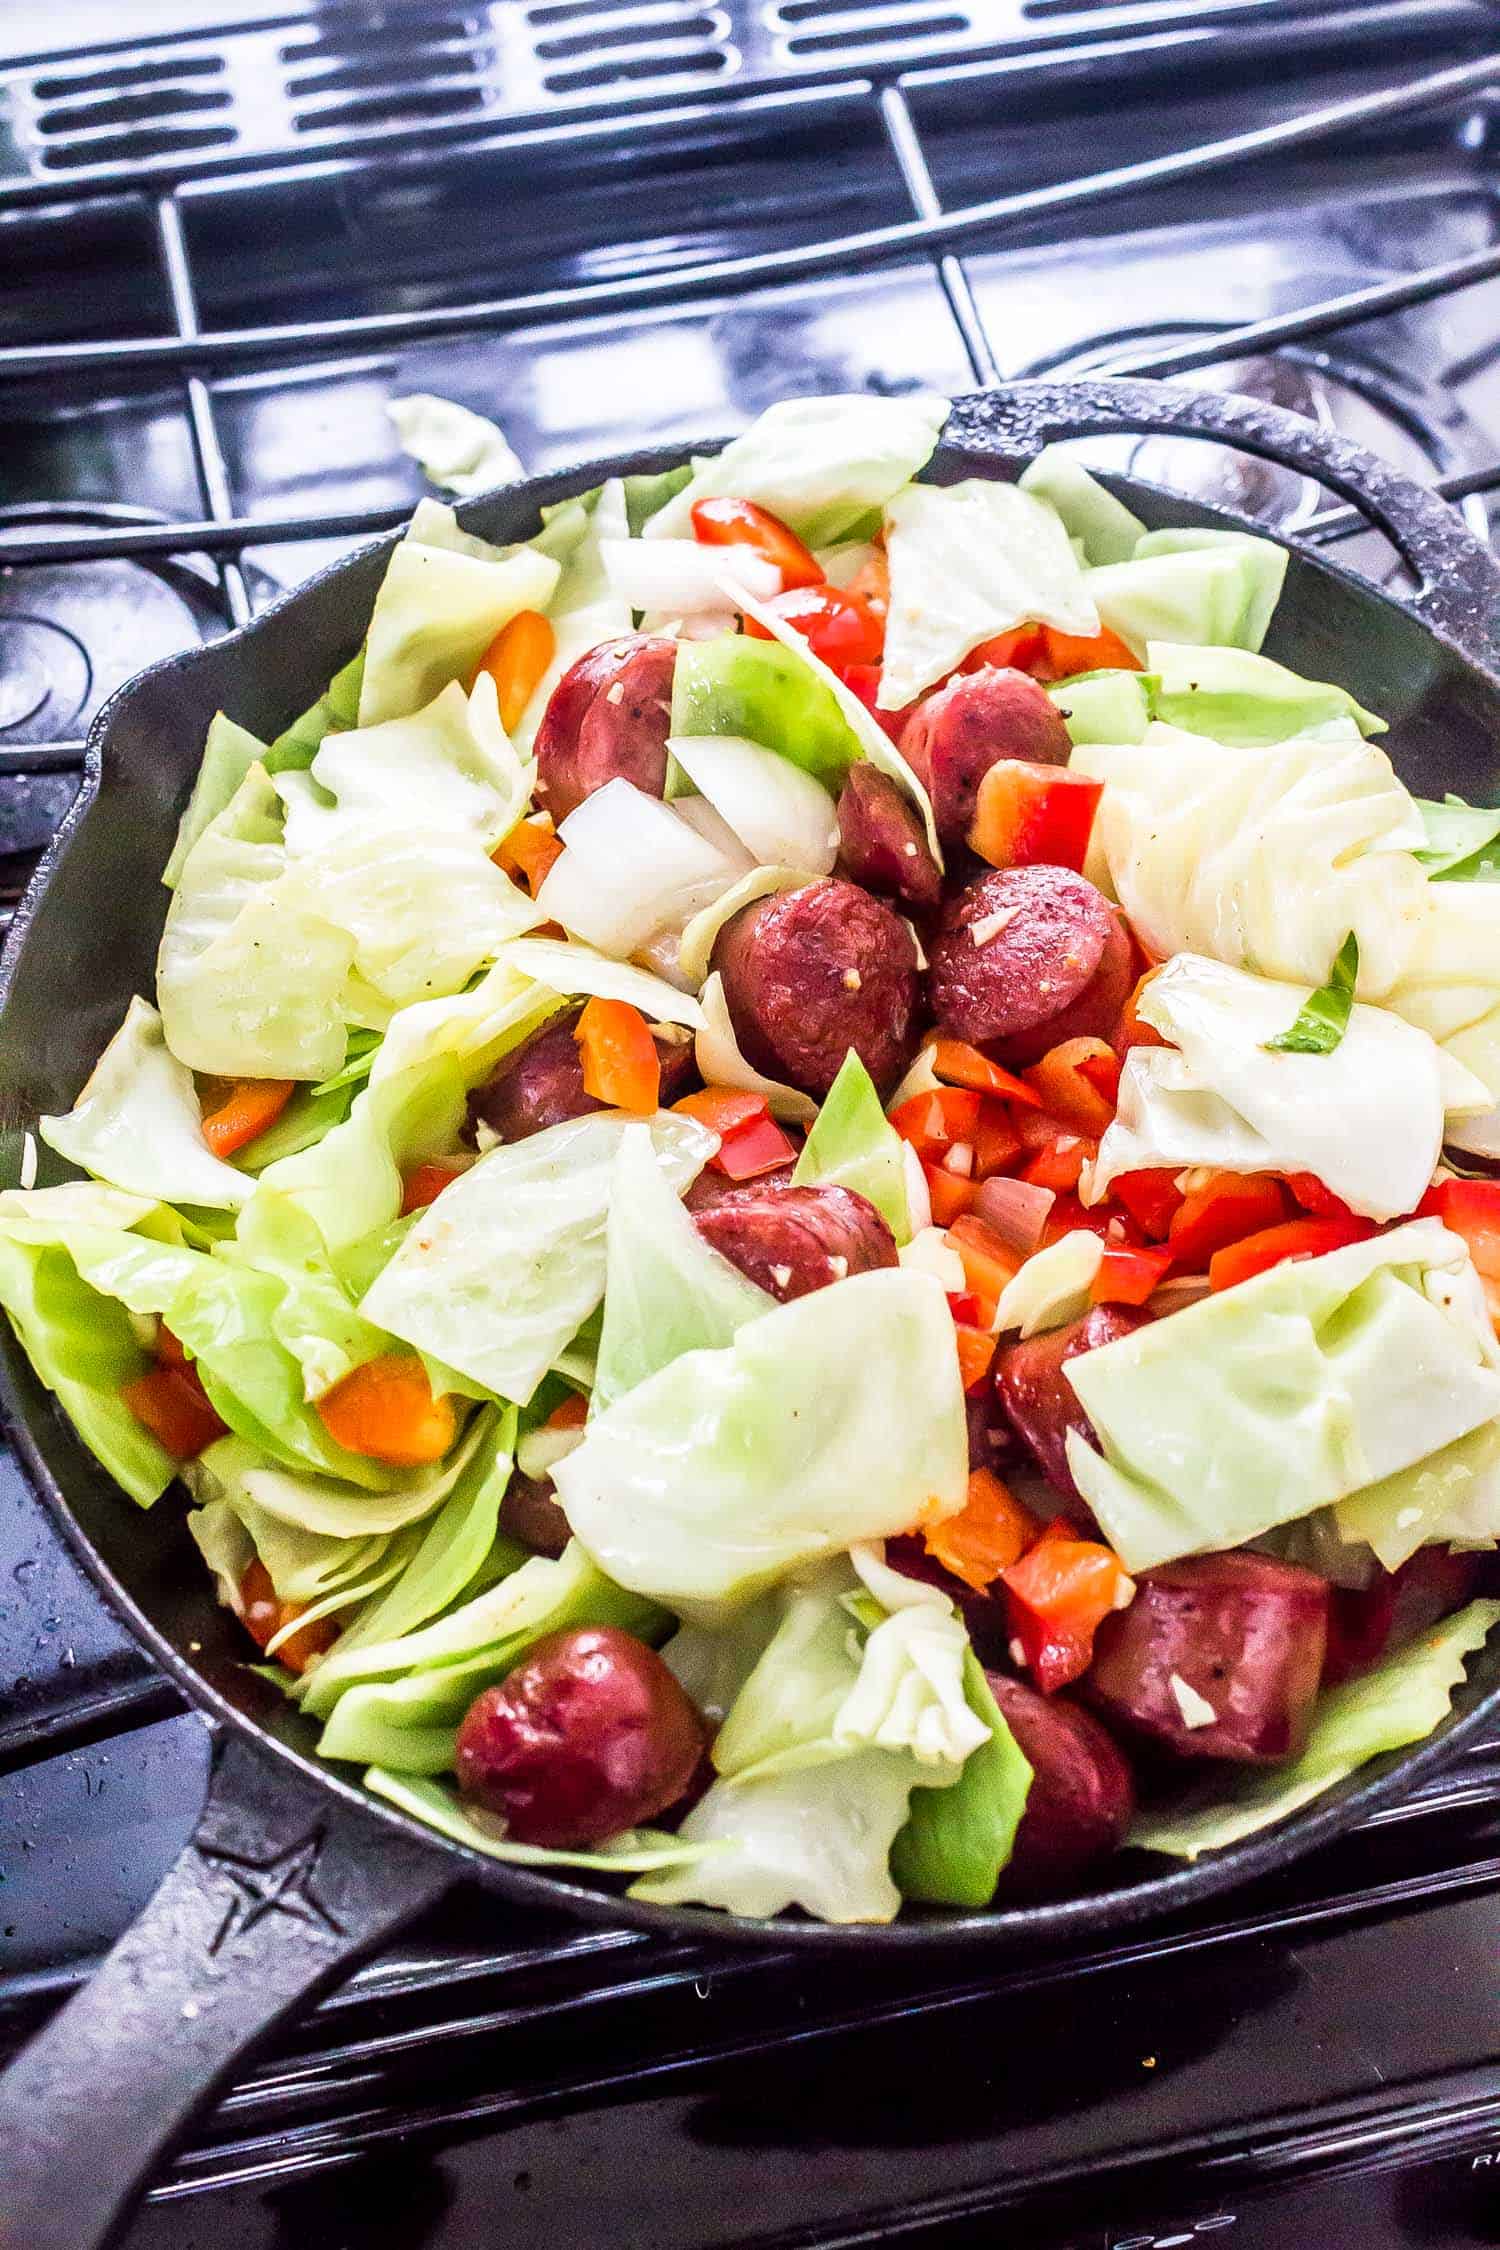 cabbage, tomatoes, bell peppers, and onions in a cast iron skillet